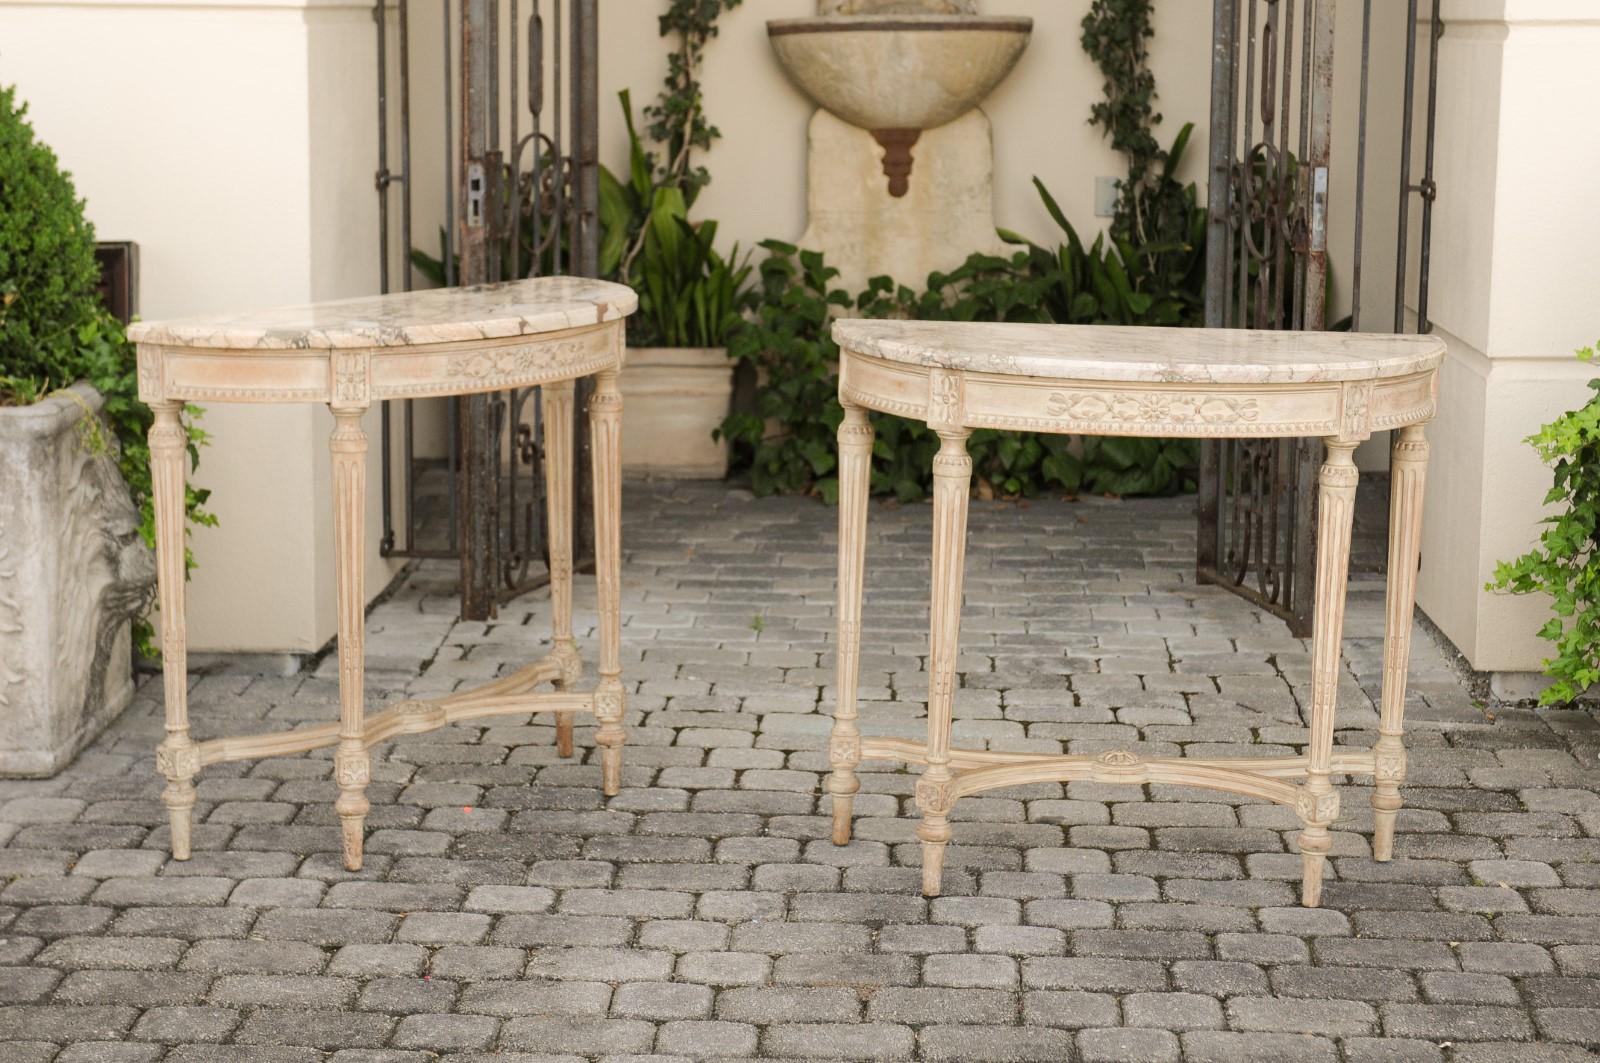 A pair of French neoclassical style carved and painted wooden demi-lune console tables from the early 20th century, with marble tops and fluted legs. Born in France during the Belle Époque era, each of this pair of demilunes features a semi-circular